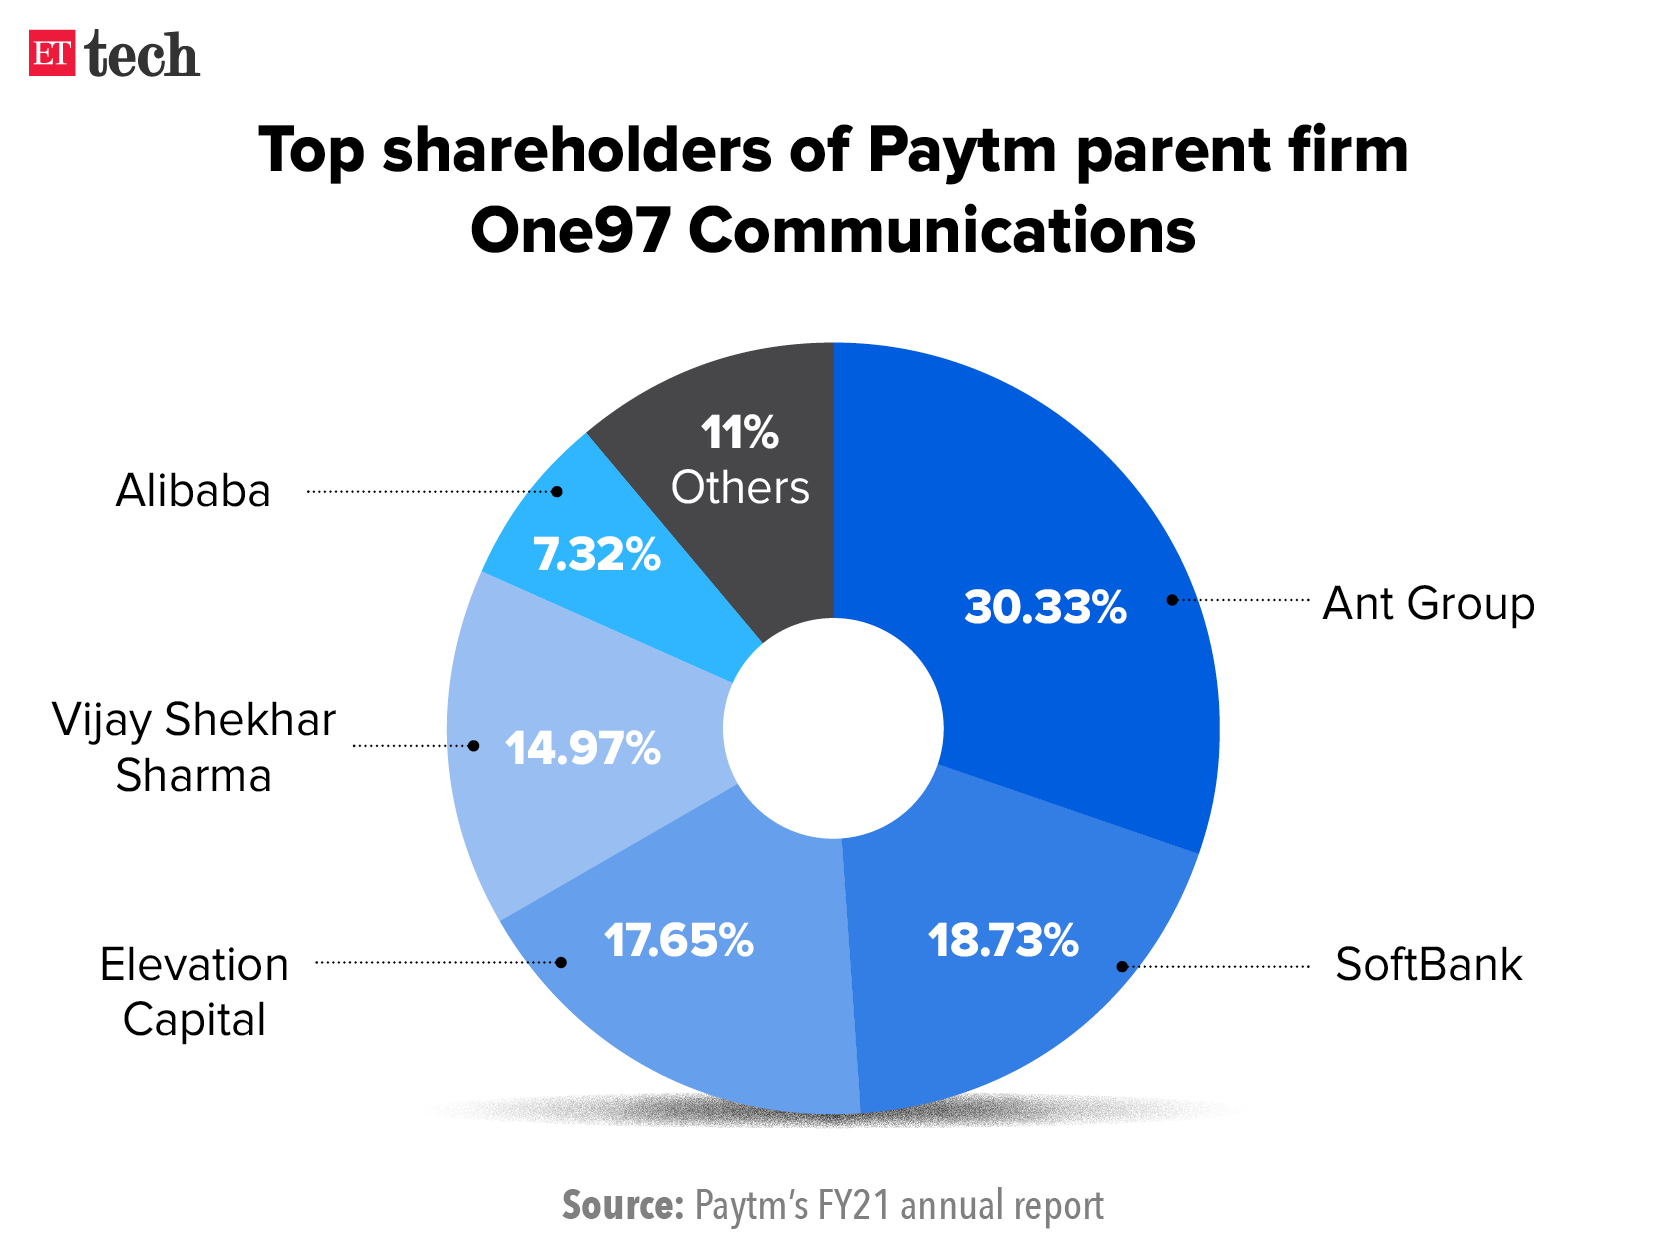 Top shareholders of Paytm parent